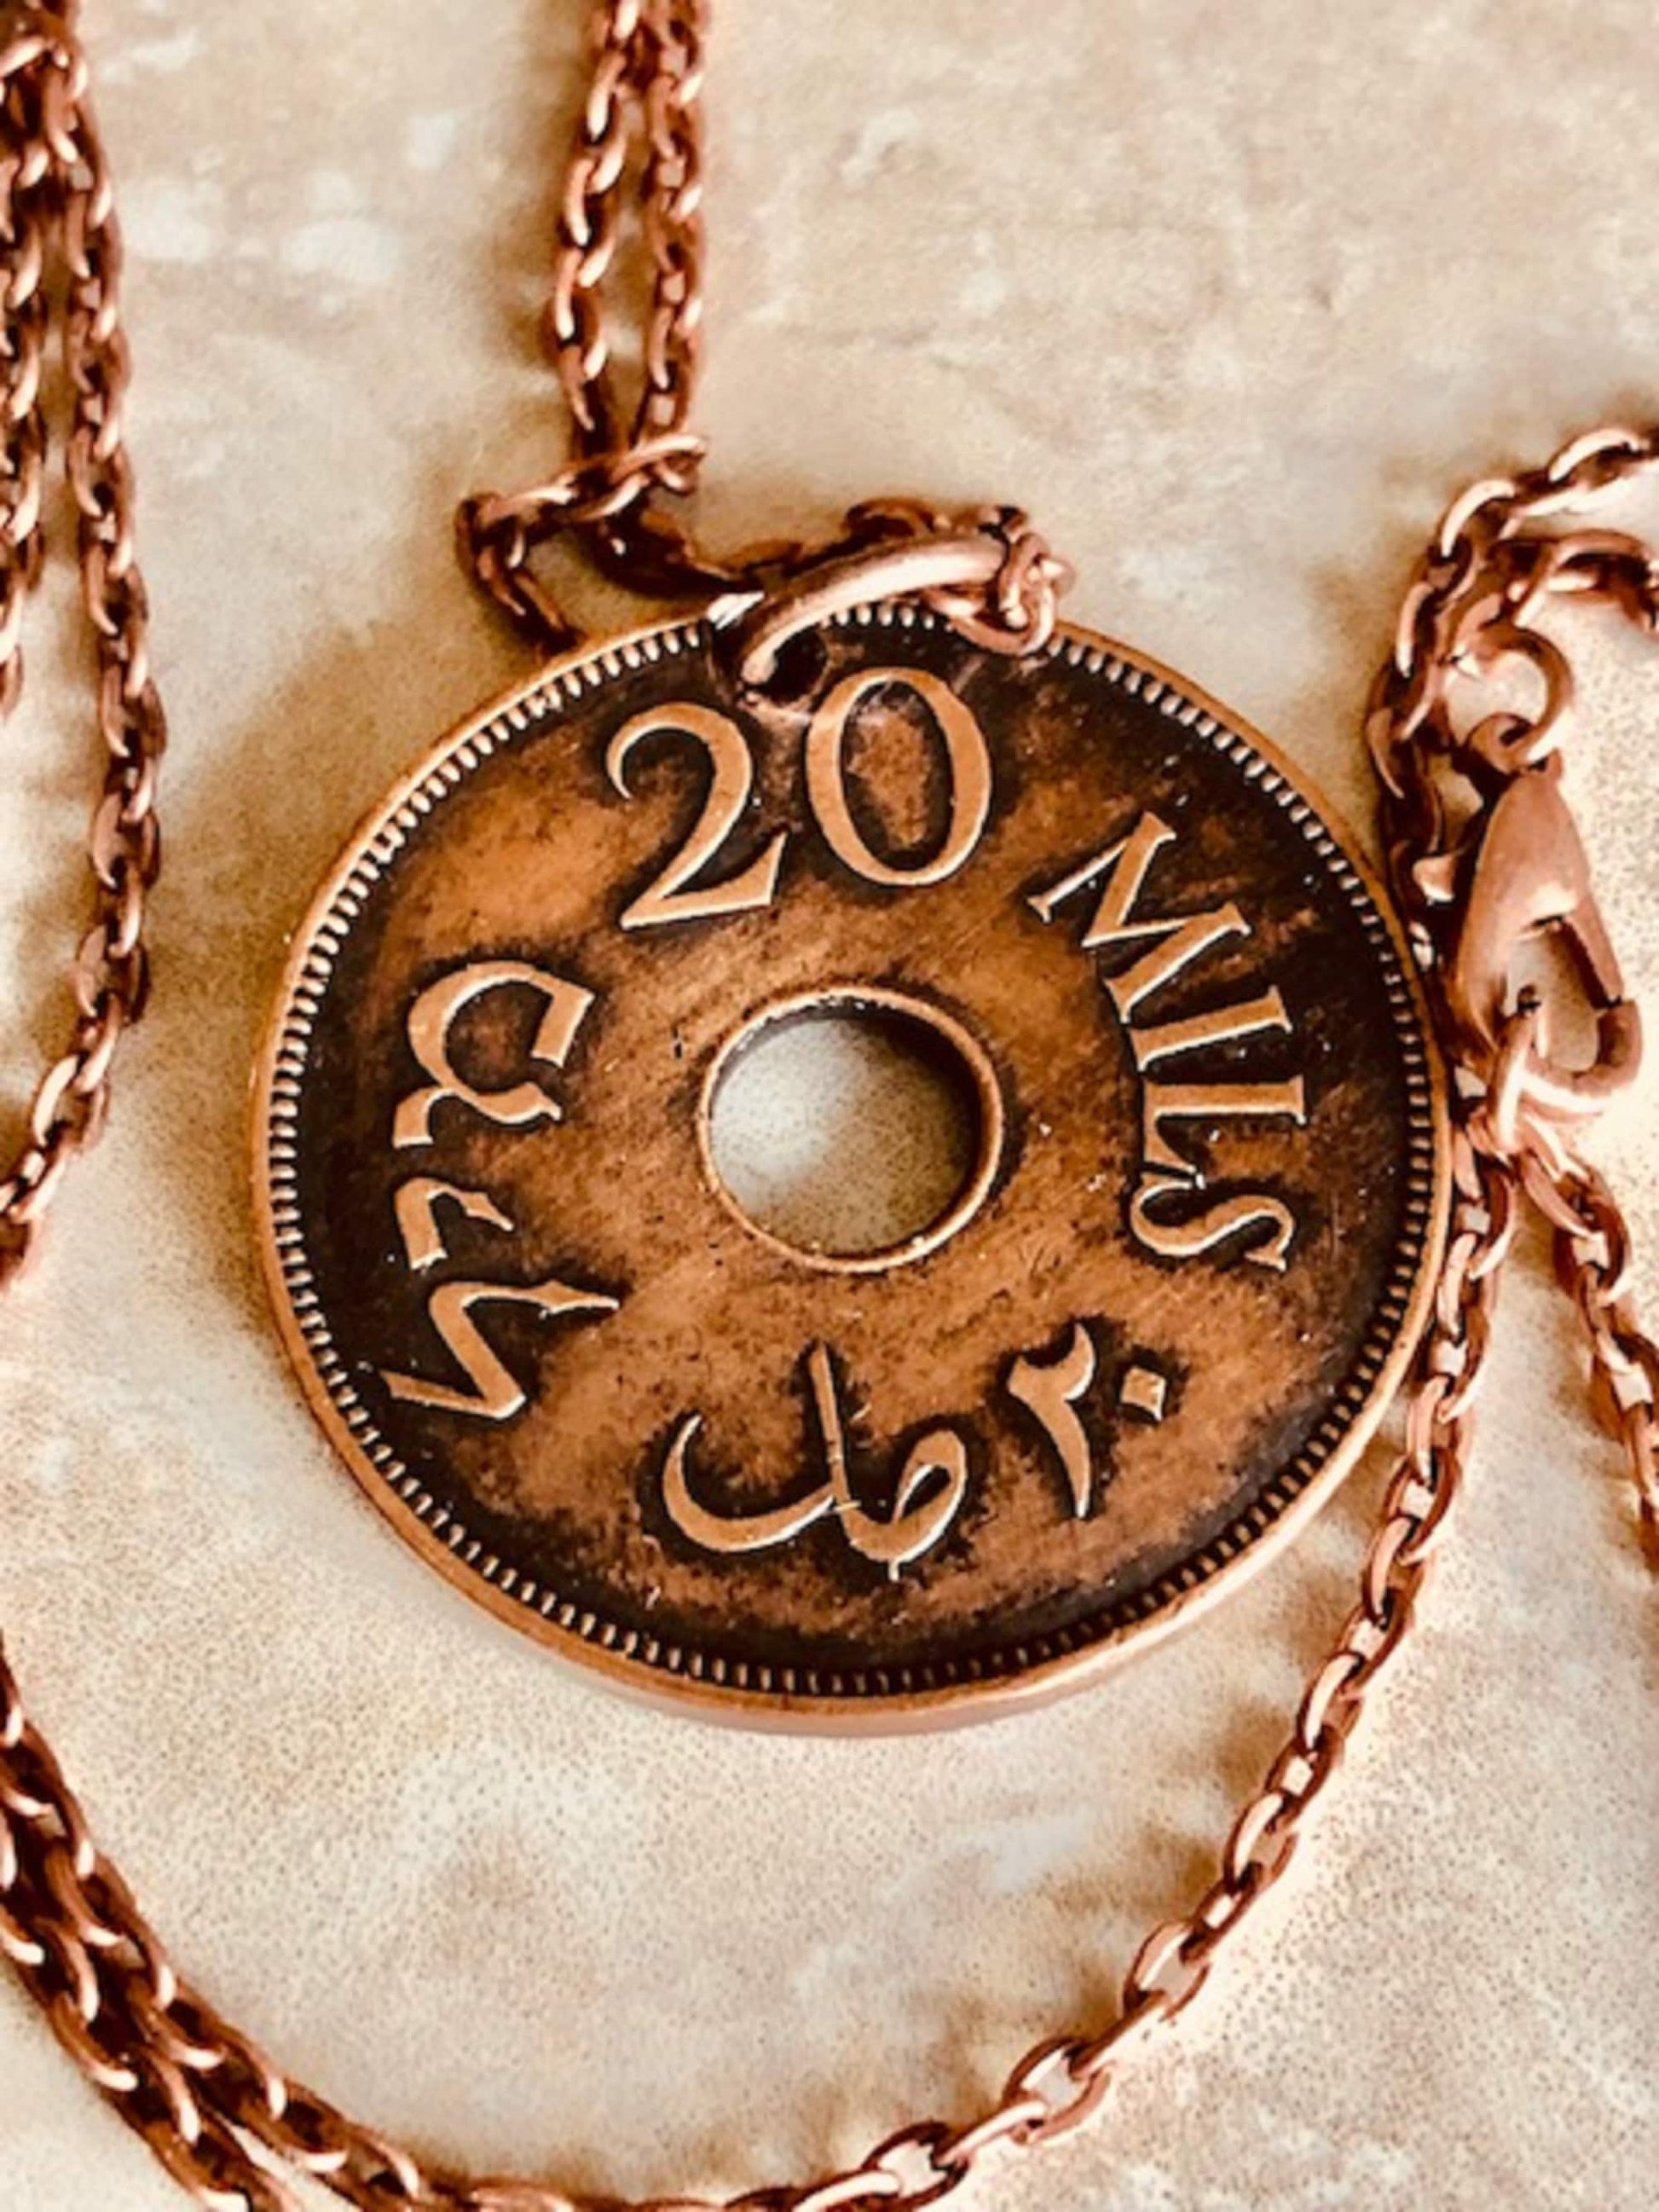 Palestine Coin Necklace Pendant 20 Mils Jewelry Vintage Custom Made Rare coins - Coin Enthusiast - Handmade - Fashion Jewelry